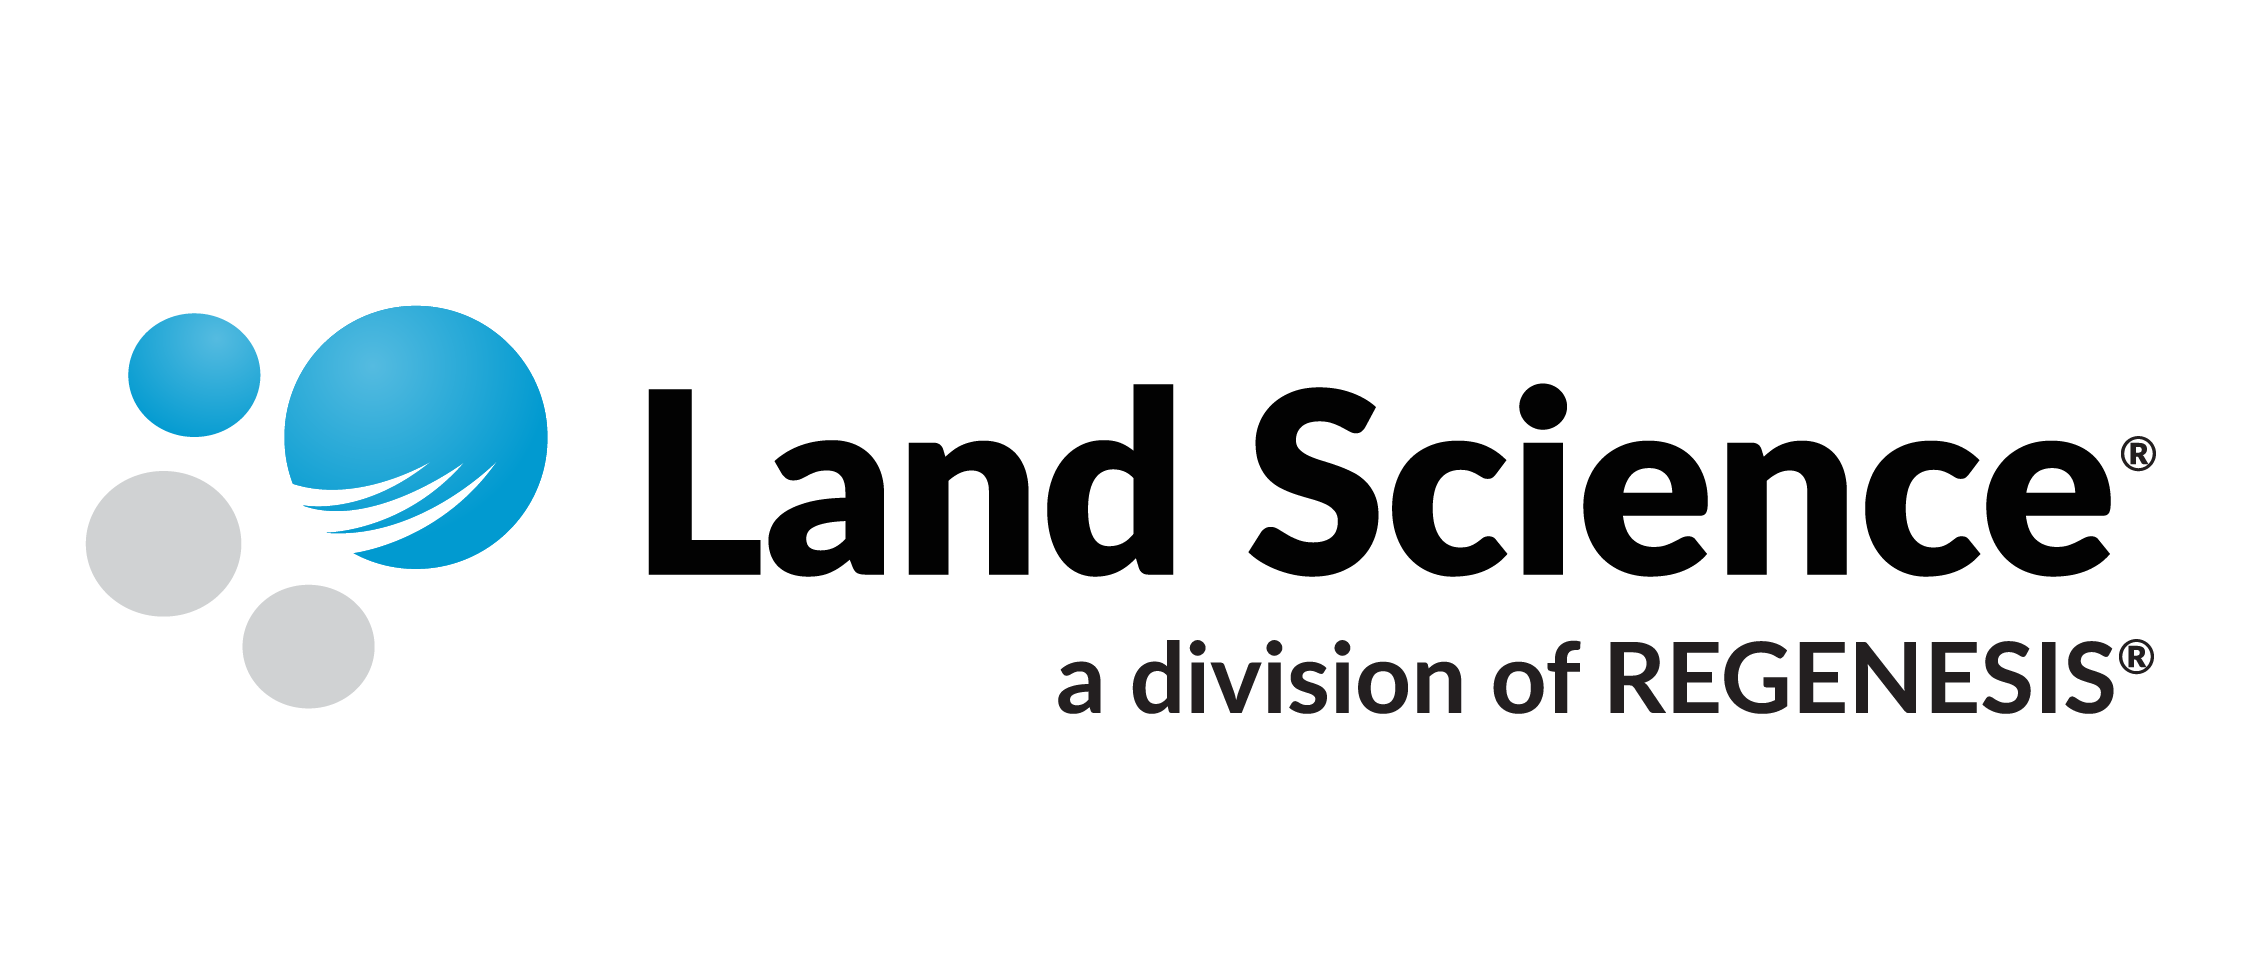 Land Science: A division of Regenesis